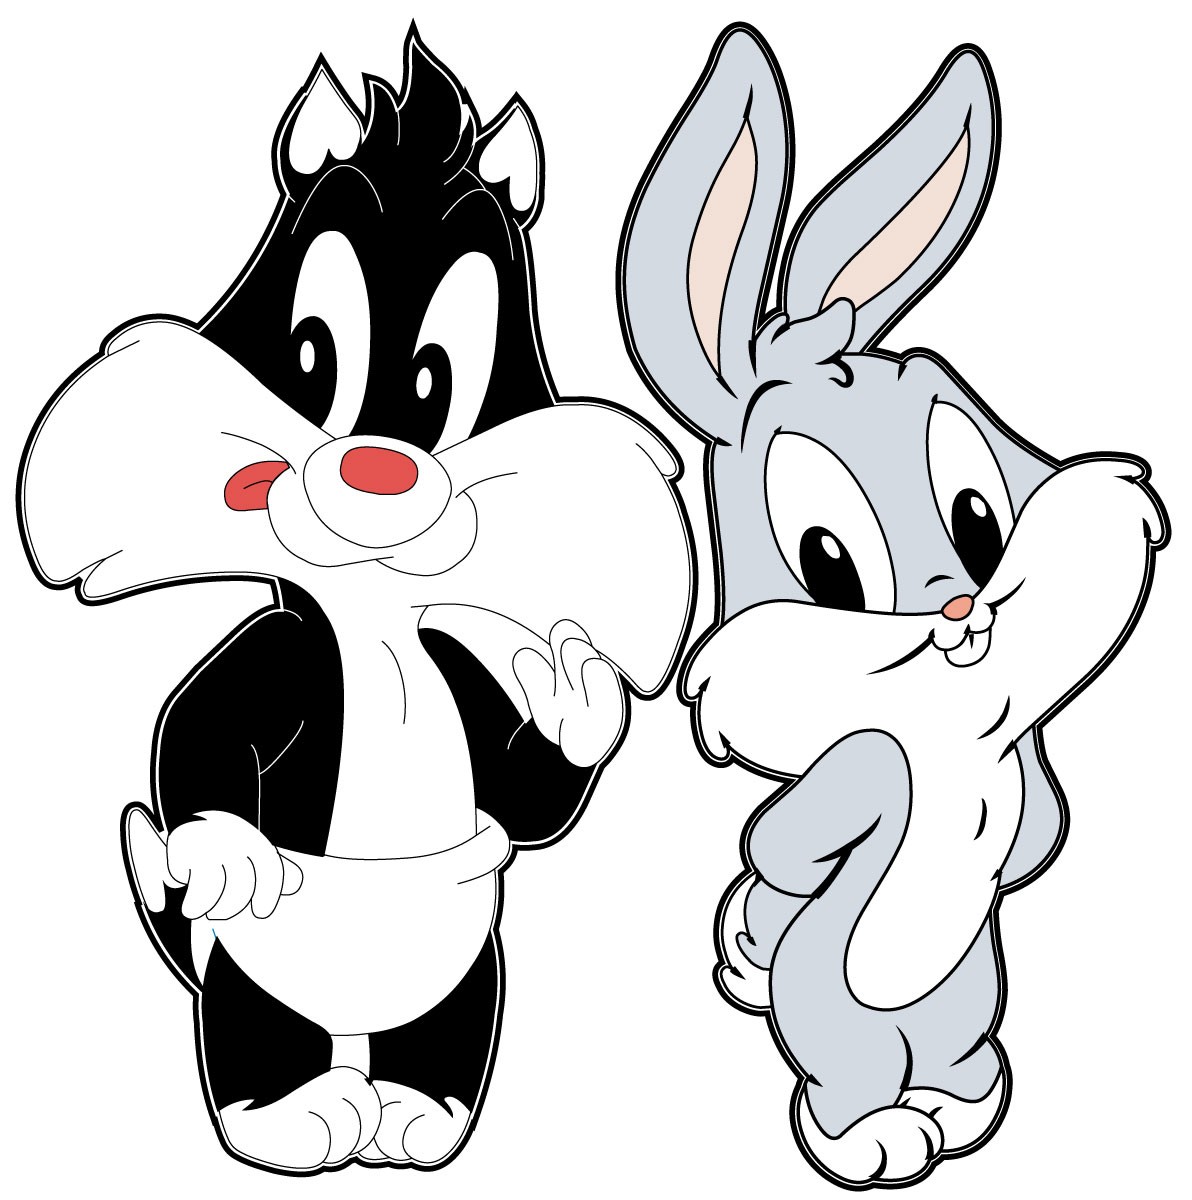 Baby Sylvester and Baby Bugs Bunny Wallpaper For Free Download ...